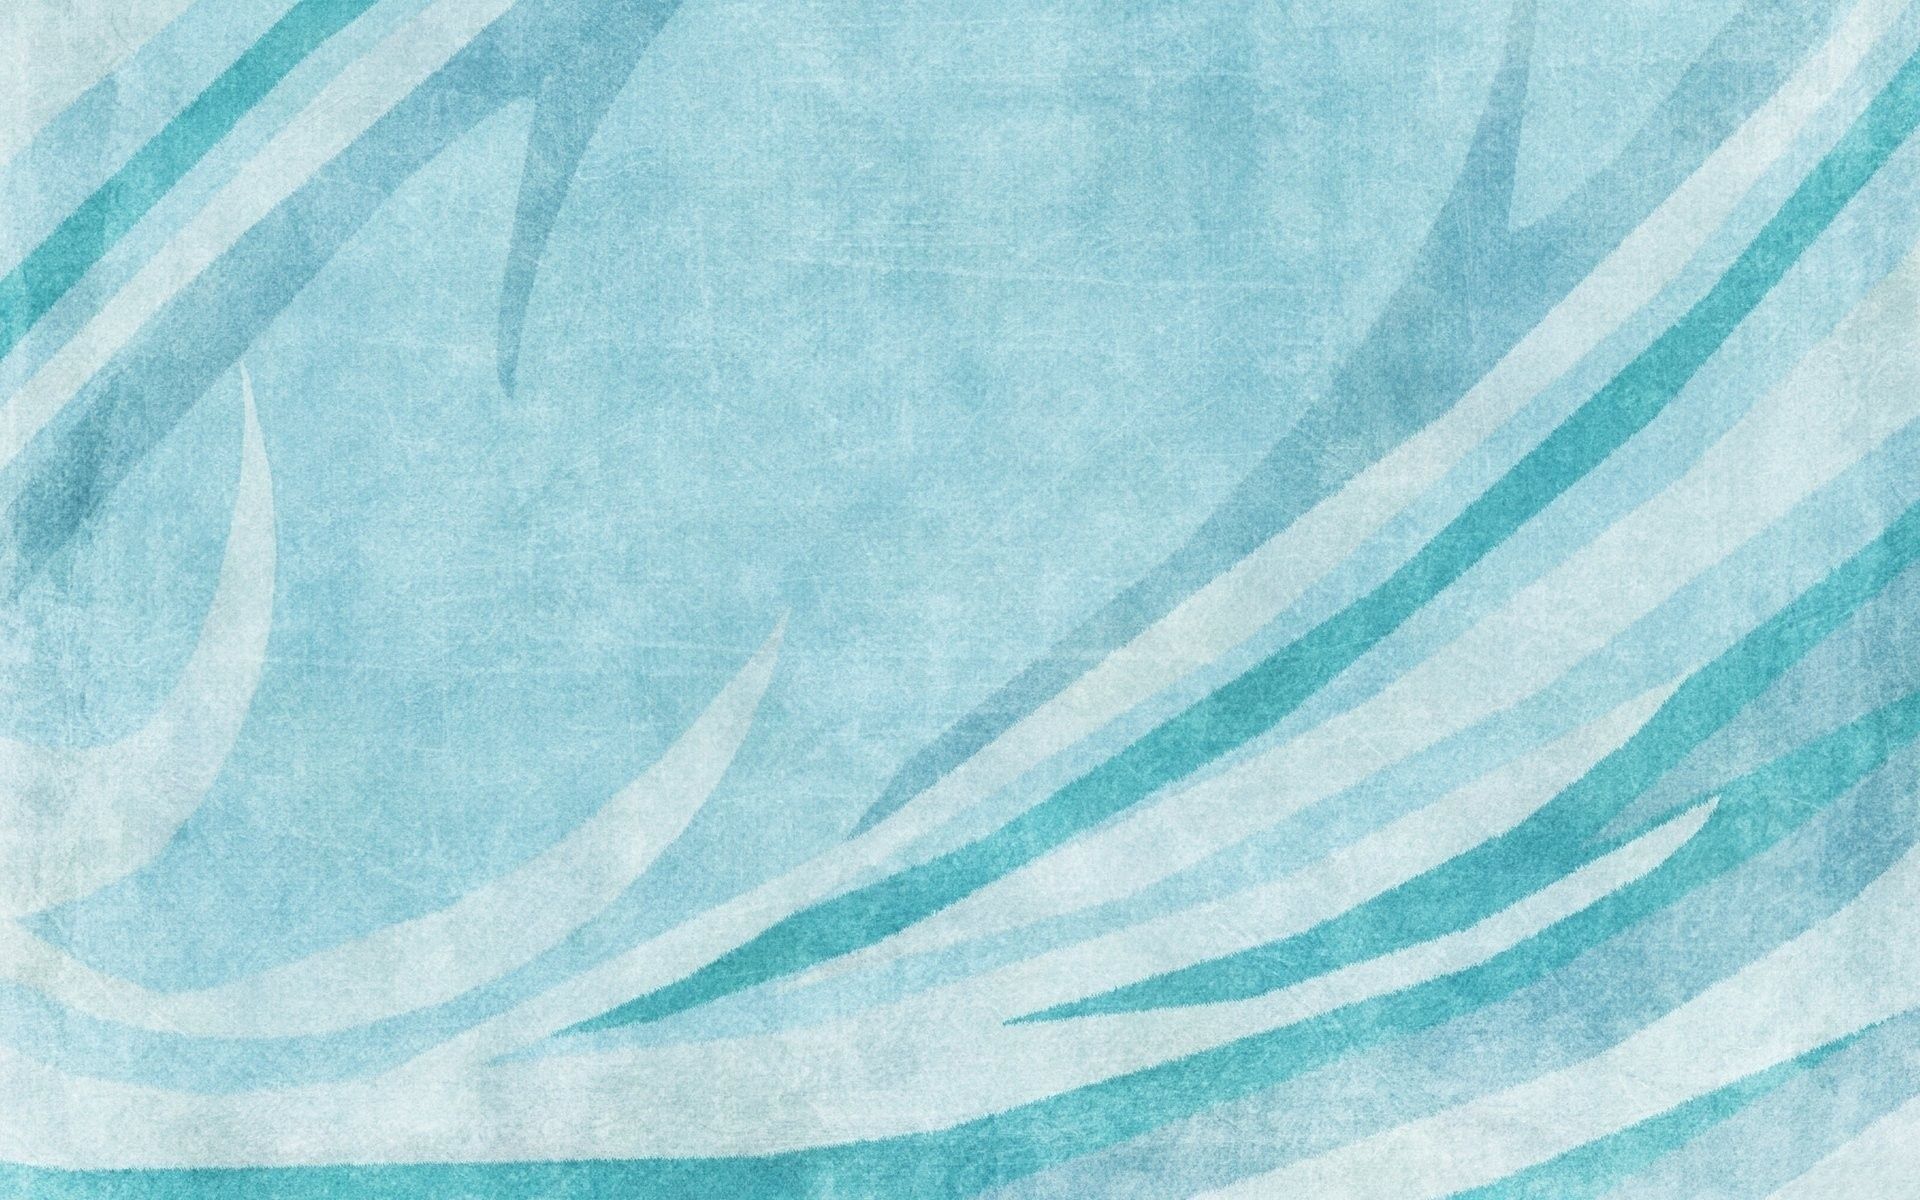 An abstract watercolor painting of flowing lines in shades of blue. - Turquoise